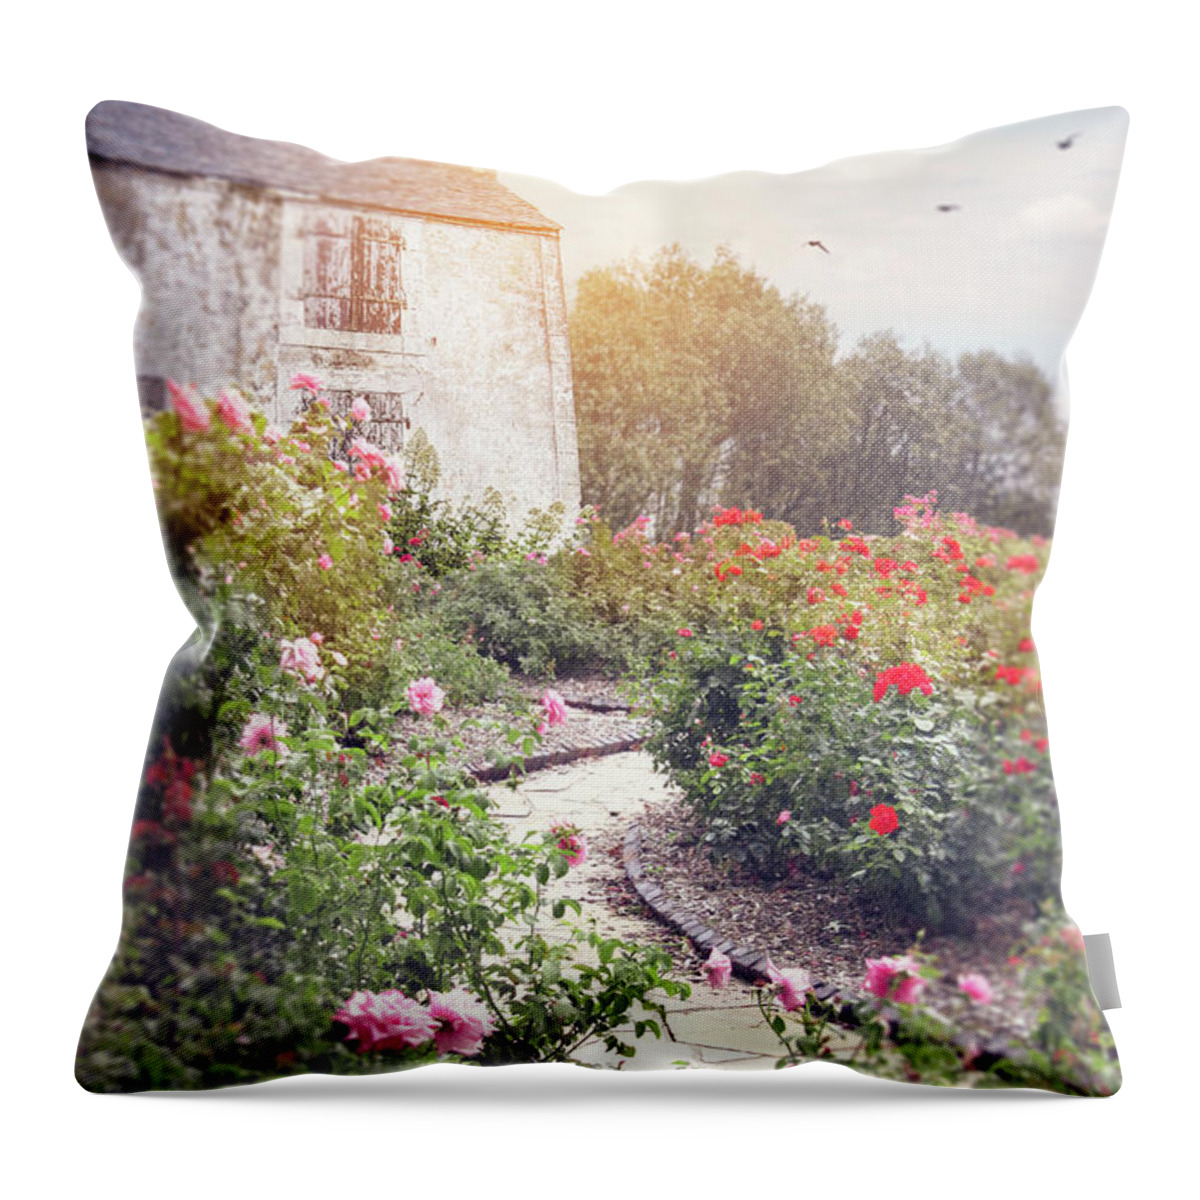 Beautiful Throw Pillow featuring the photograph Cottage Garden With Roses by Ethiriel Photography